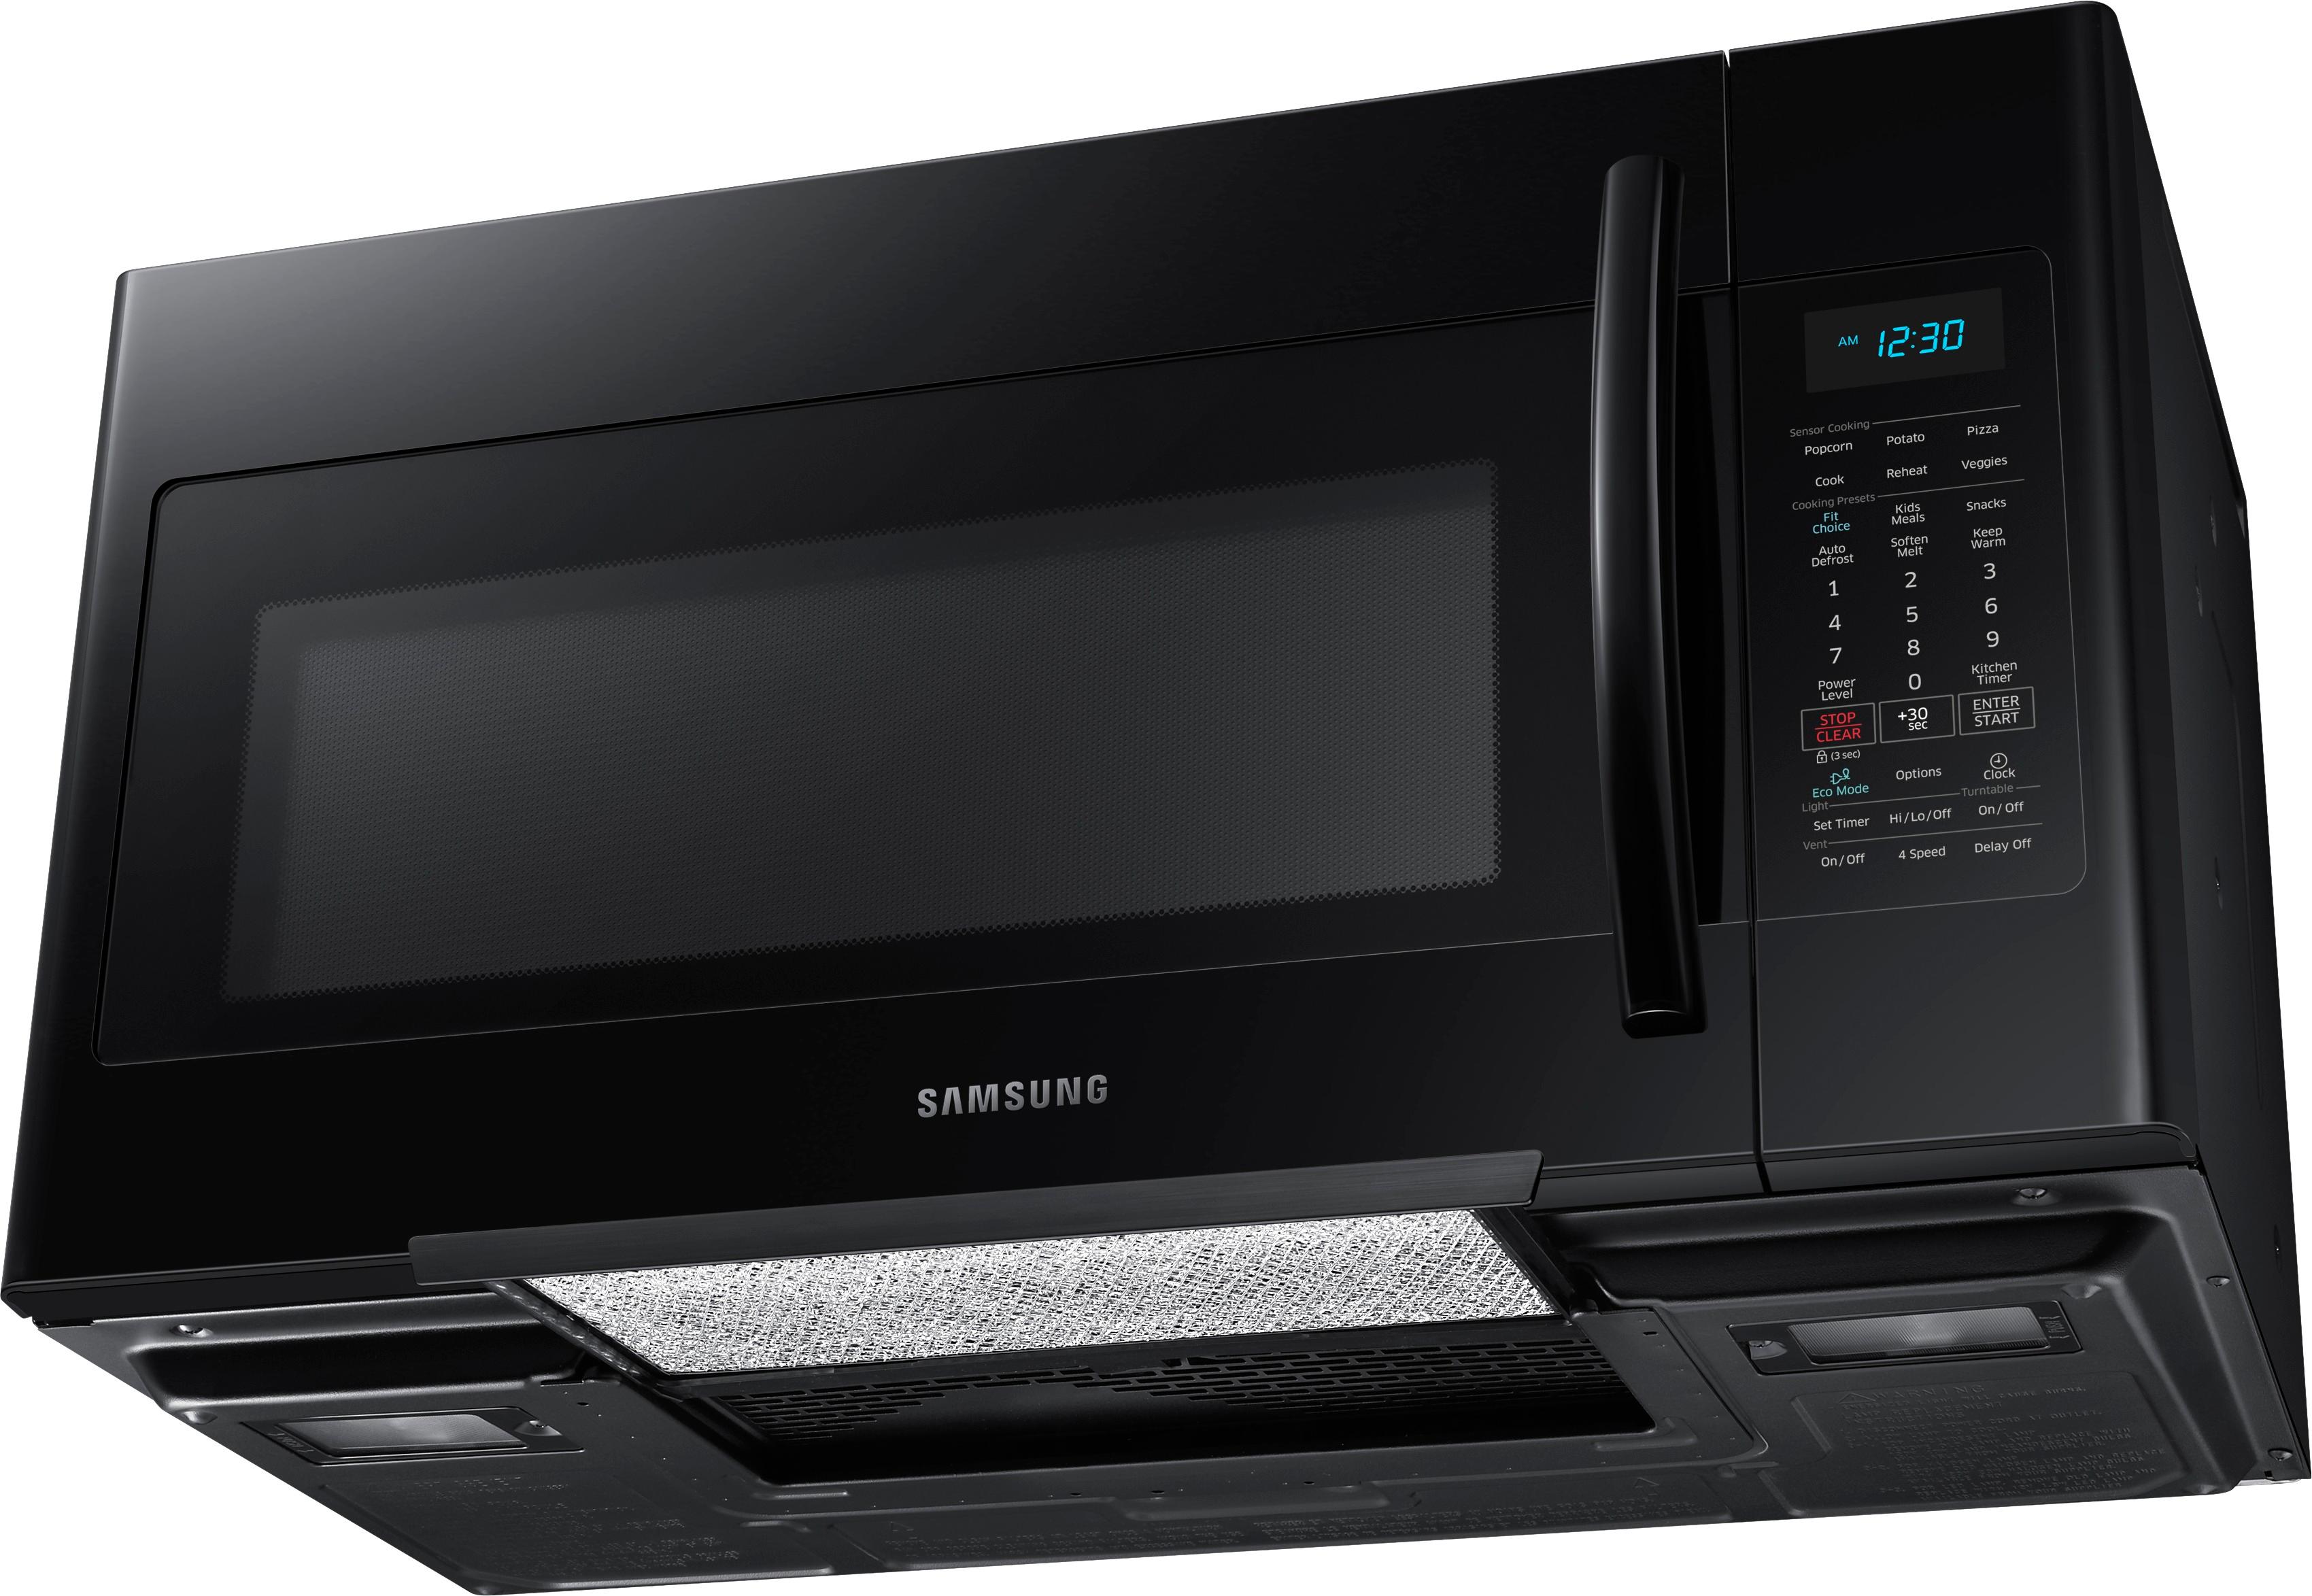 1.8 cu. ft. Over-the-Range Microwave Oven with EasyClean®